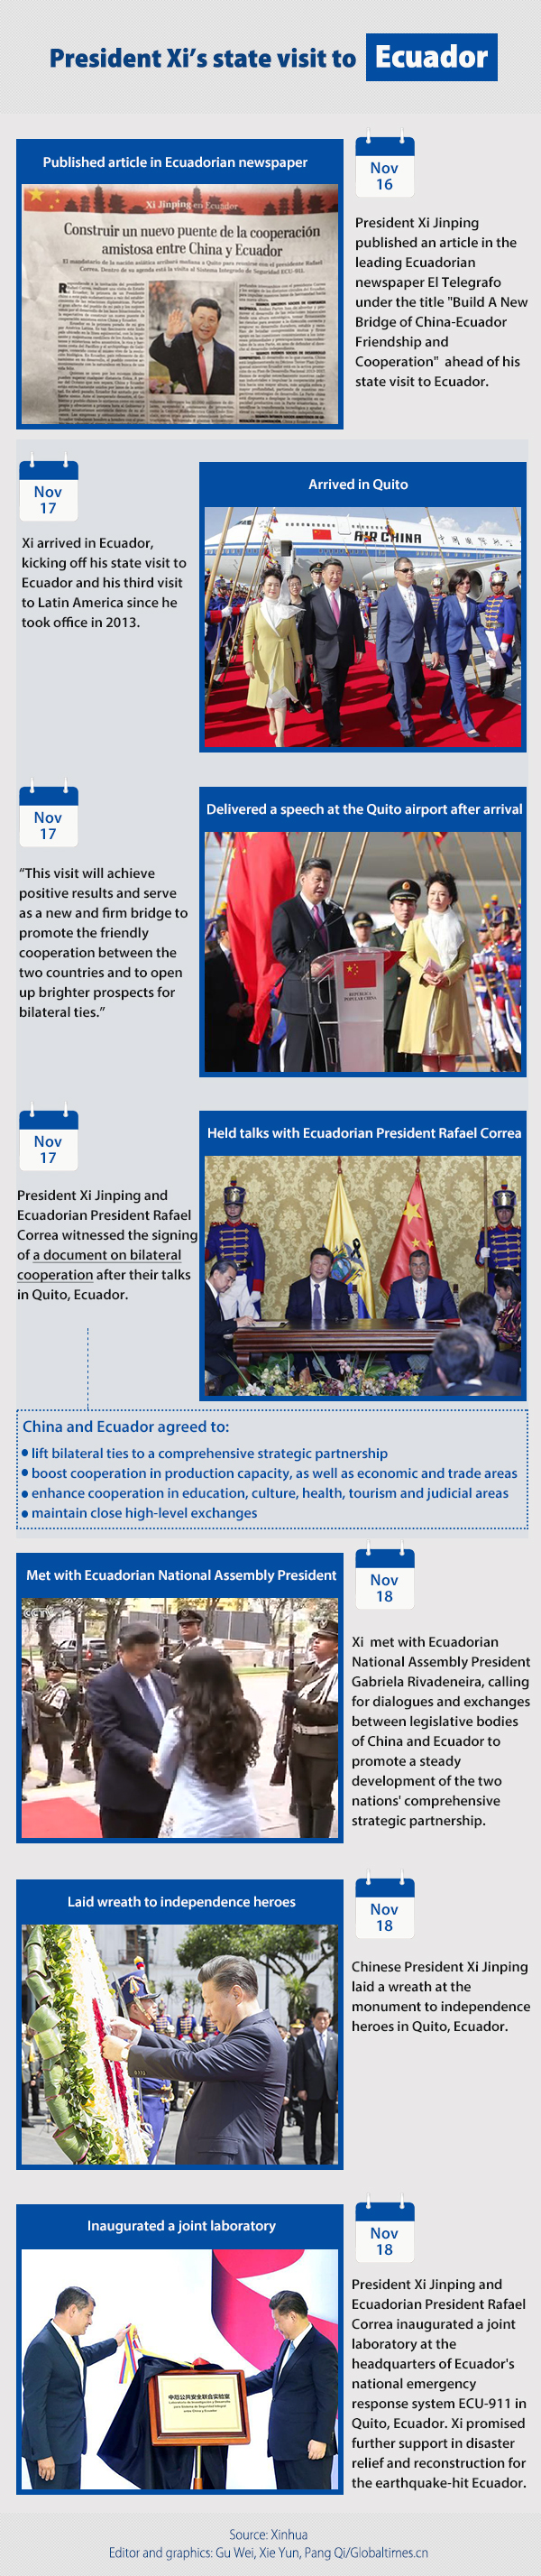 Graphic:Globaltimes.cn